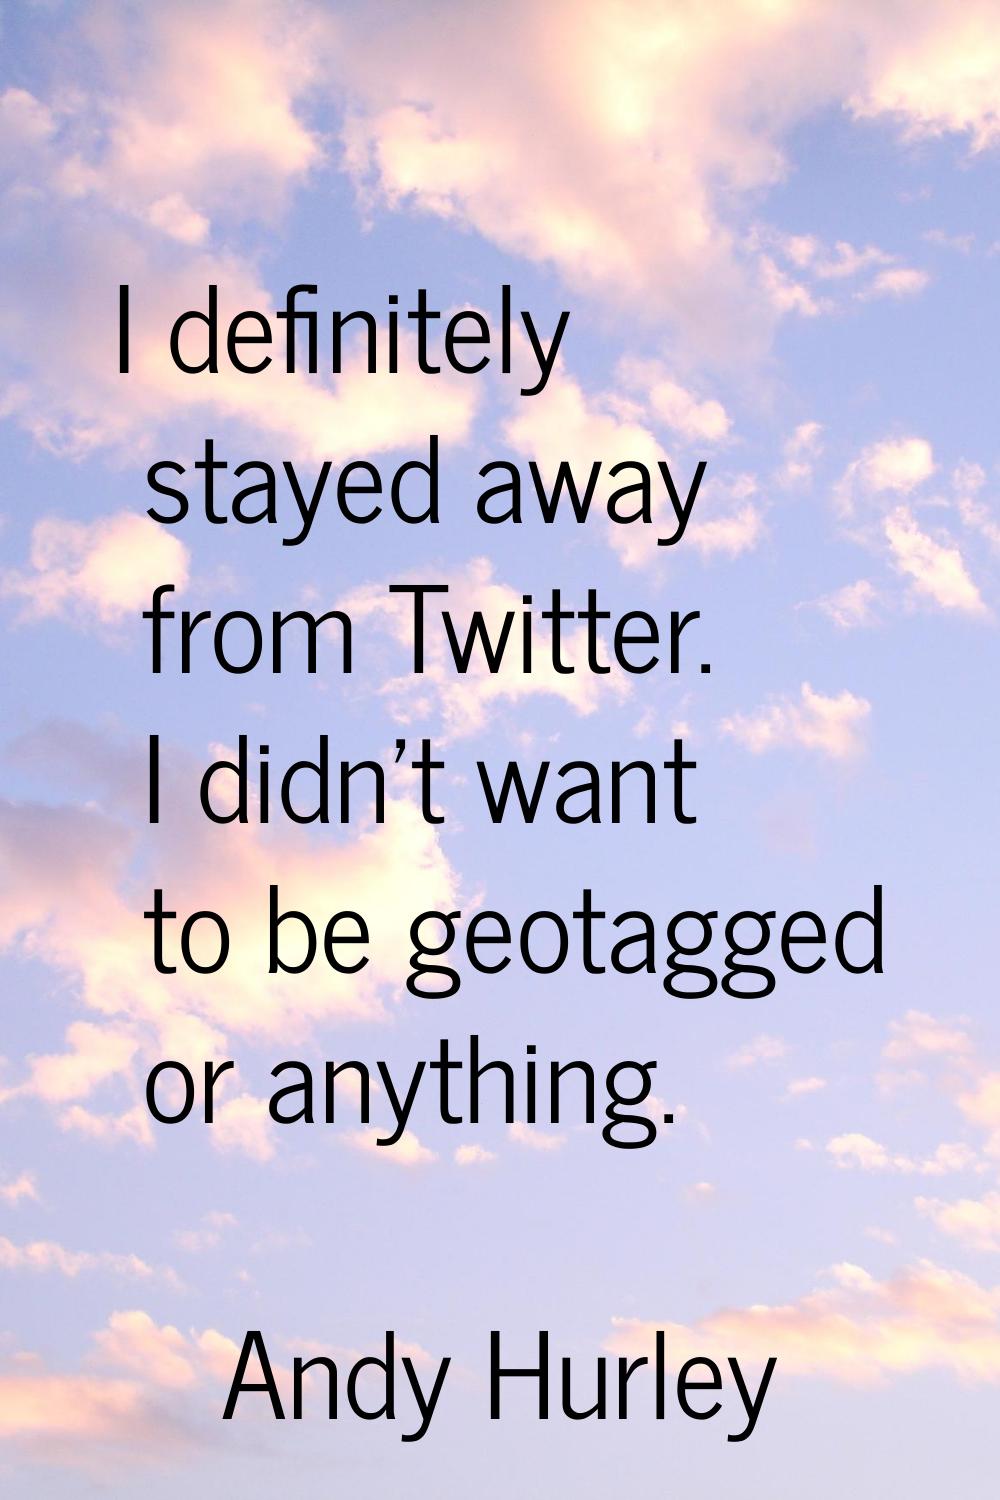 I definitely stayed away from Twitter. I didn't want to be geotagged or anything.